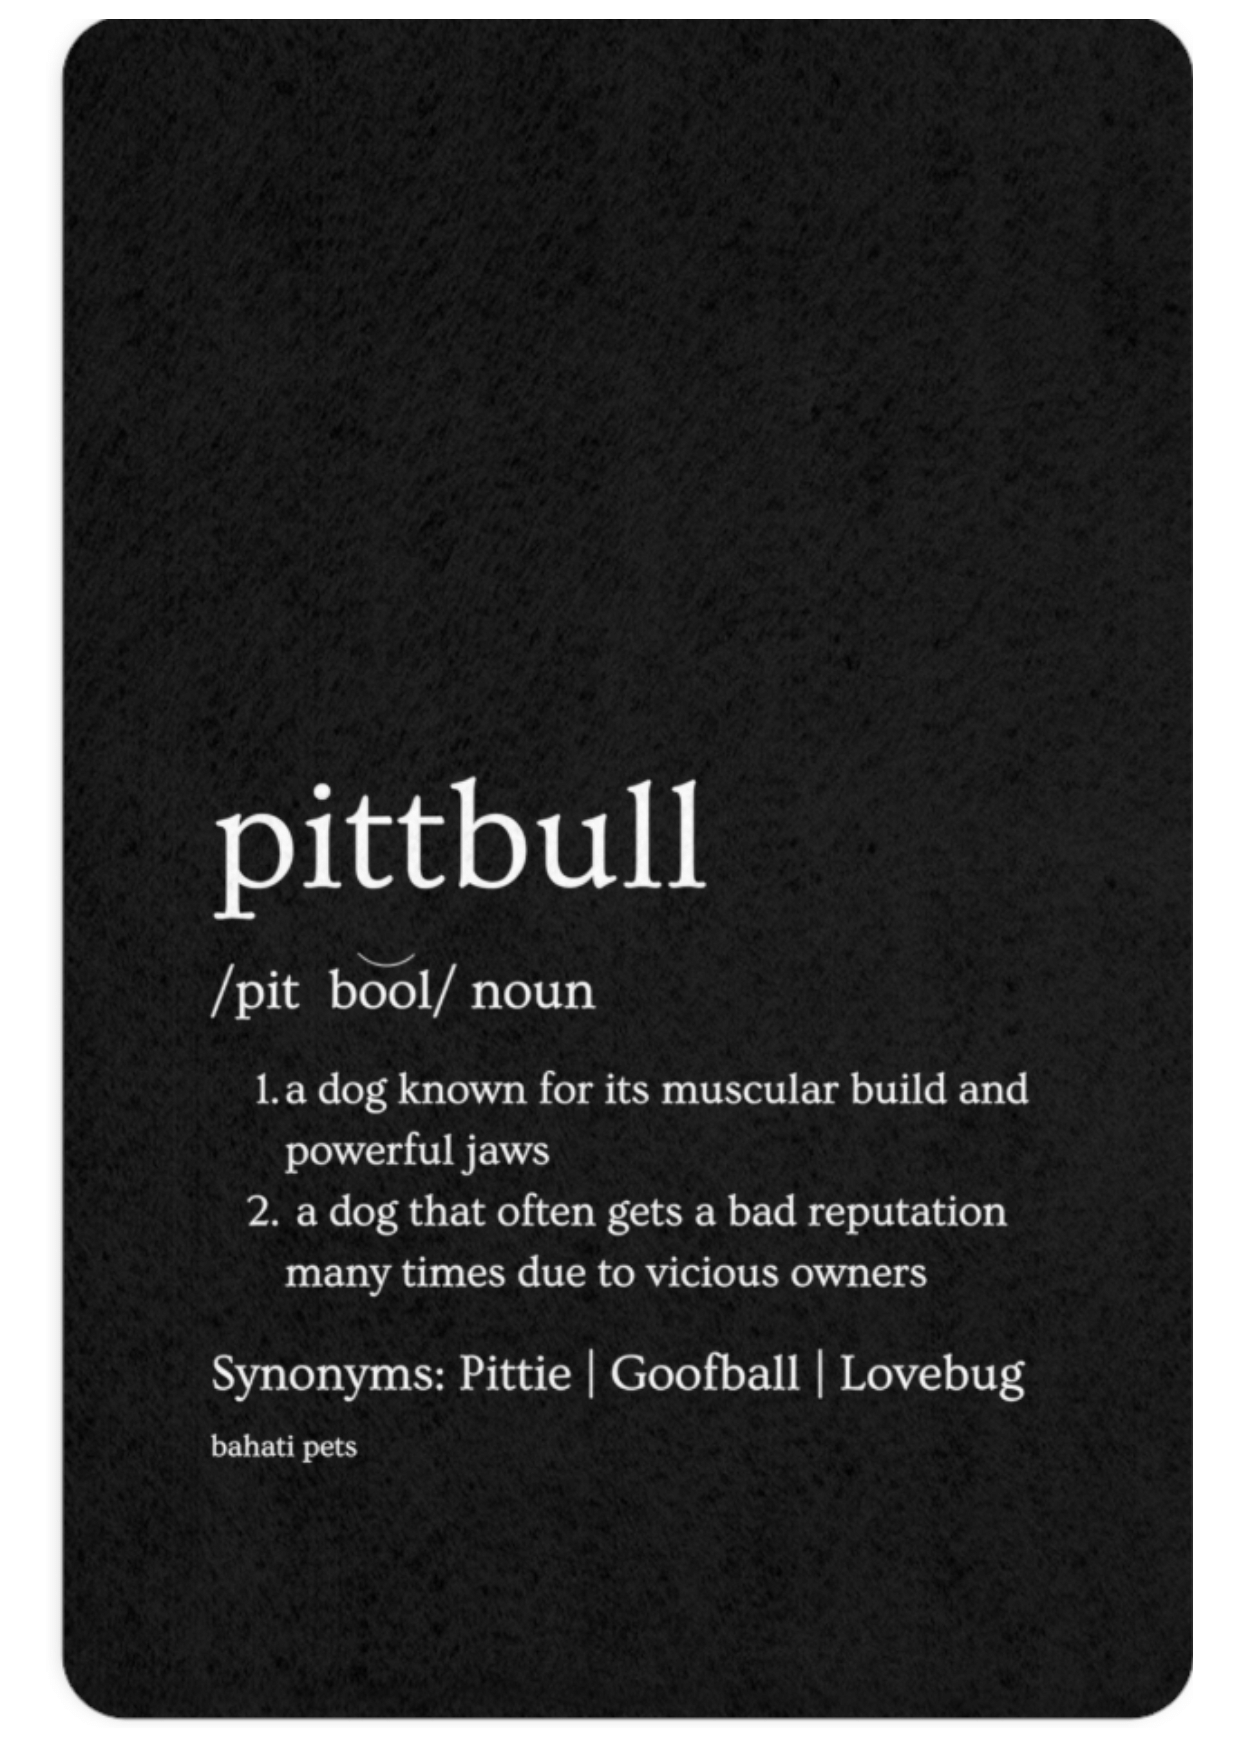 The Definition of A Pitt Bull